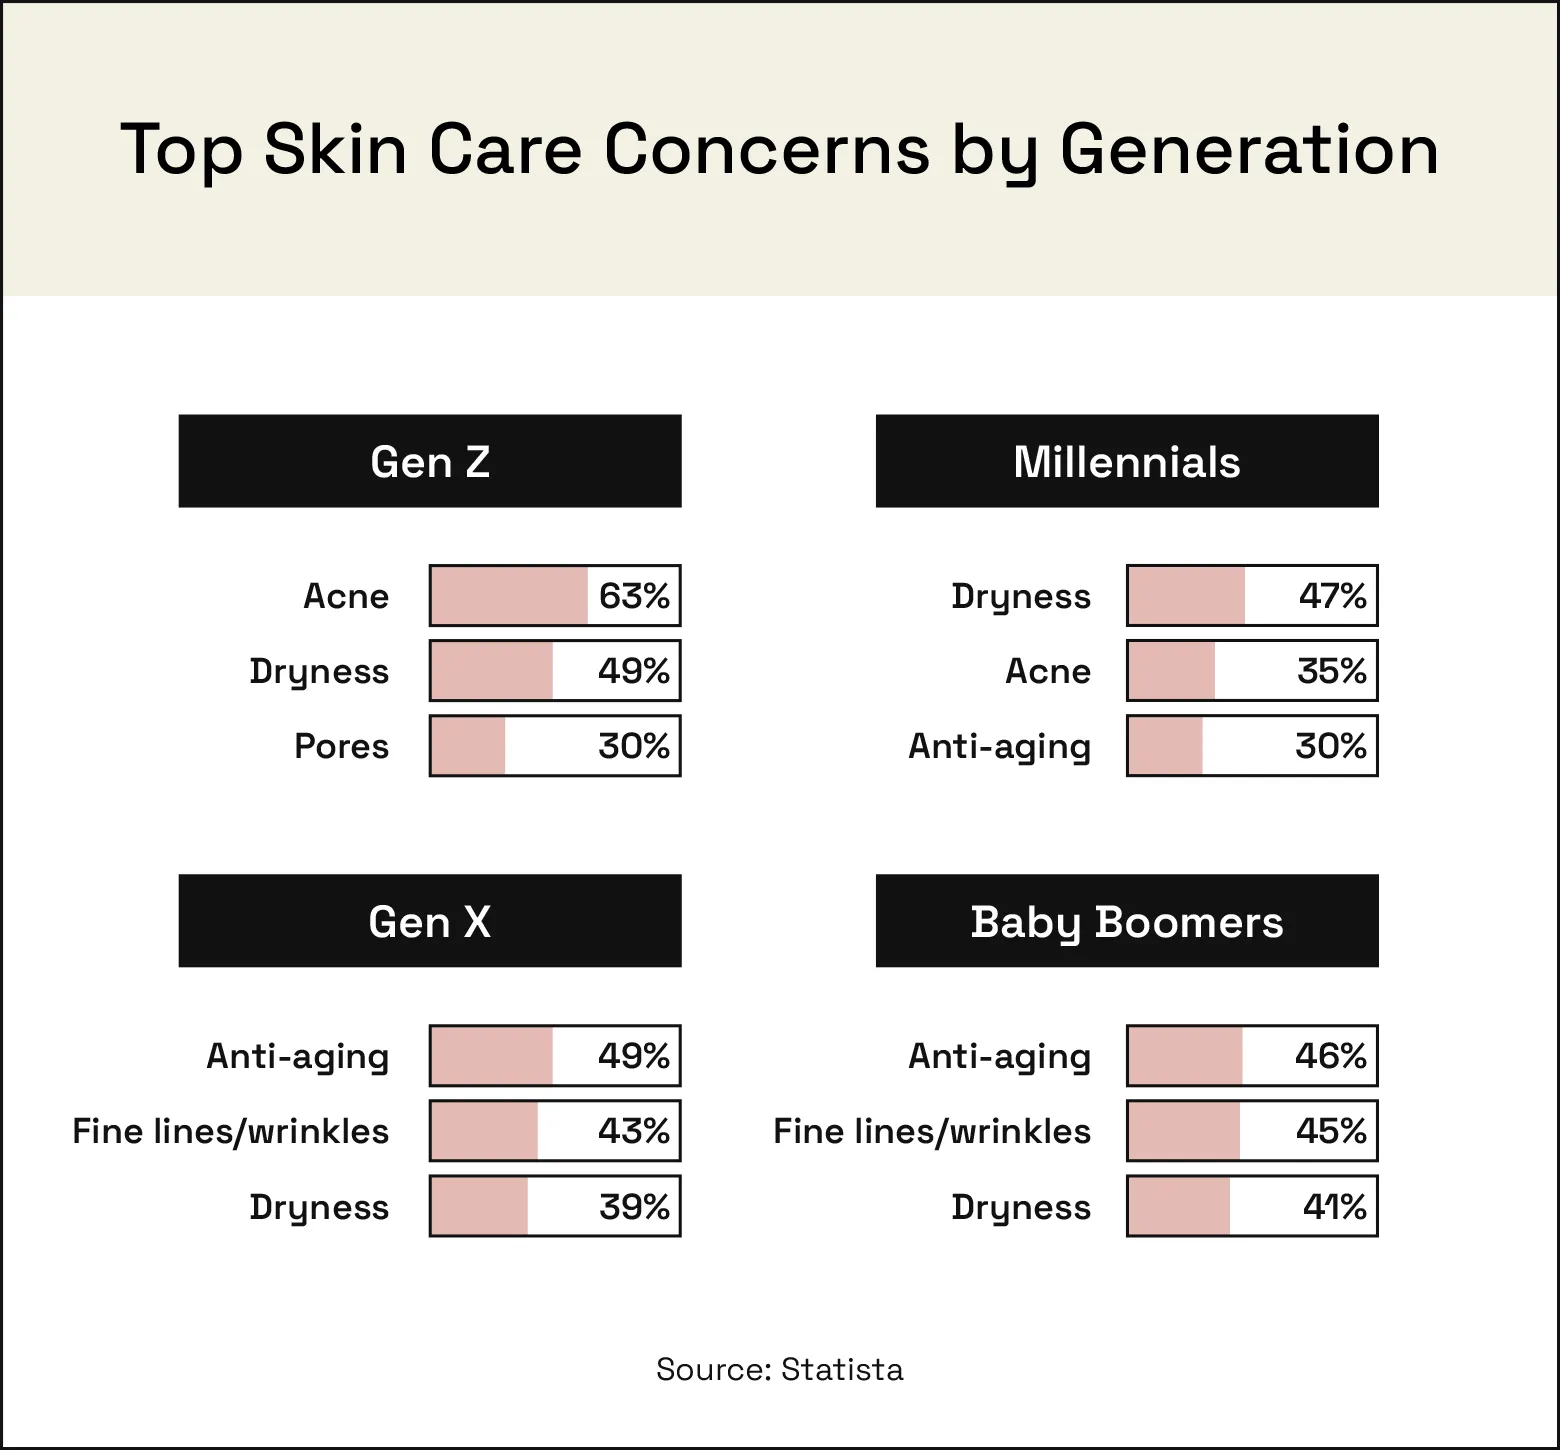 Image outlines the top skin care concerns of people by generation.